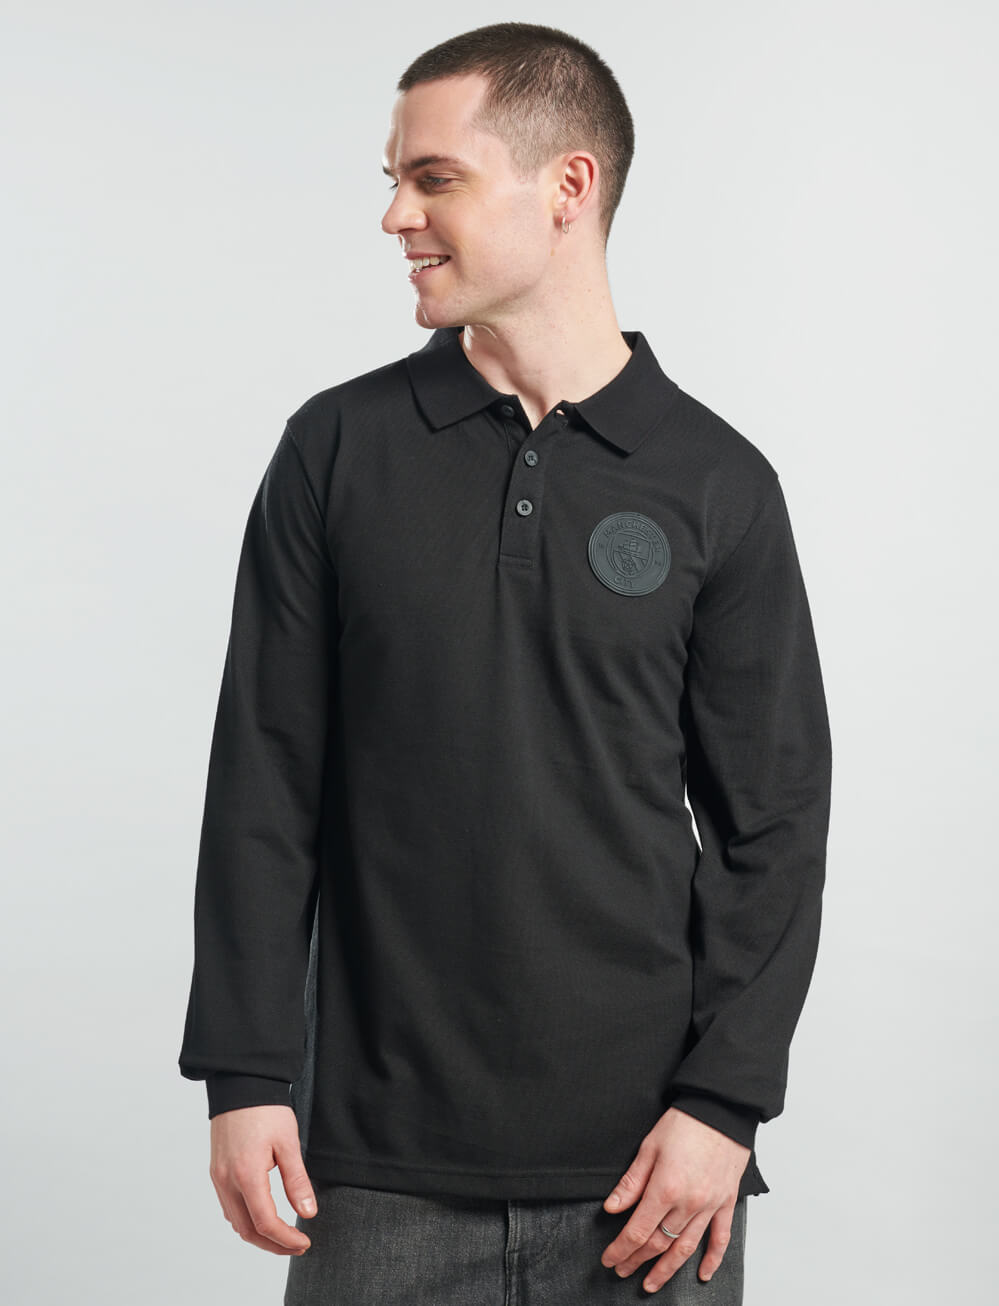 Official Manchester City Long Sleeve Polo - Black - The World Football Store